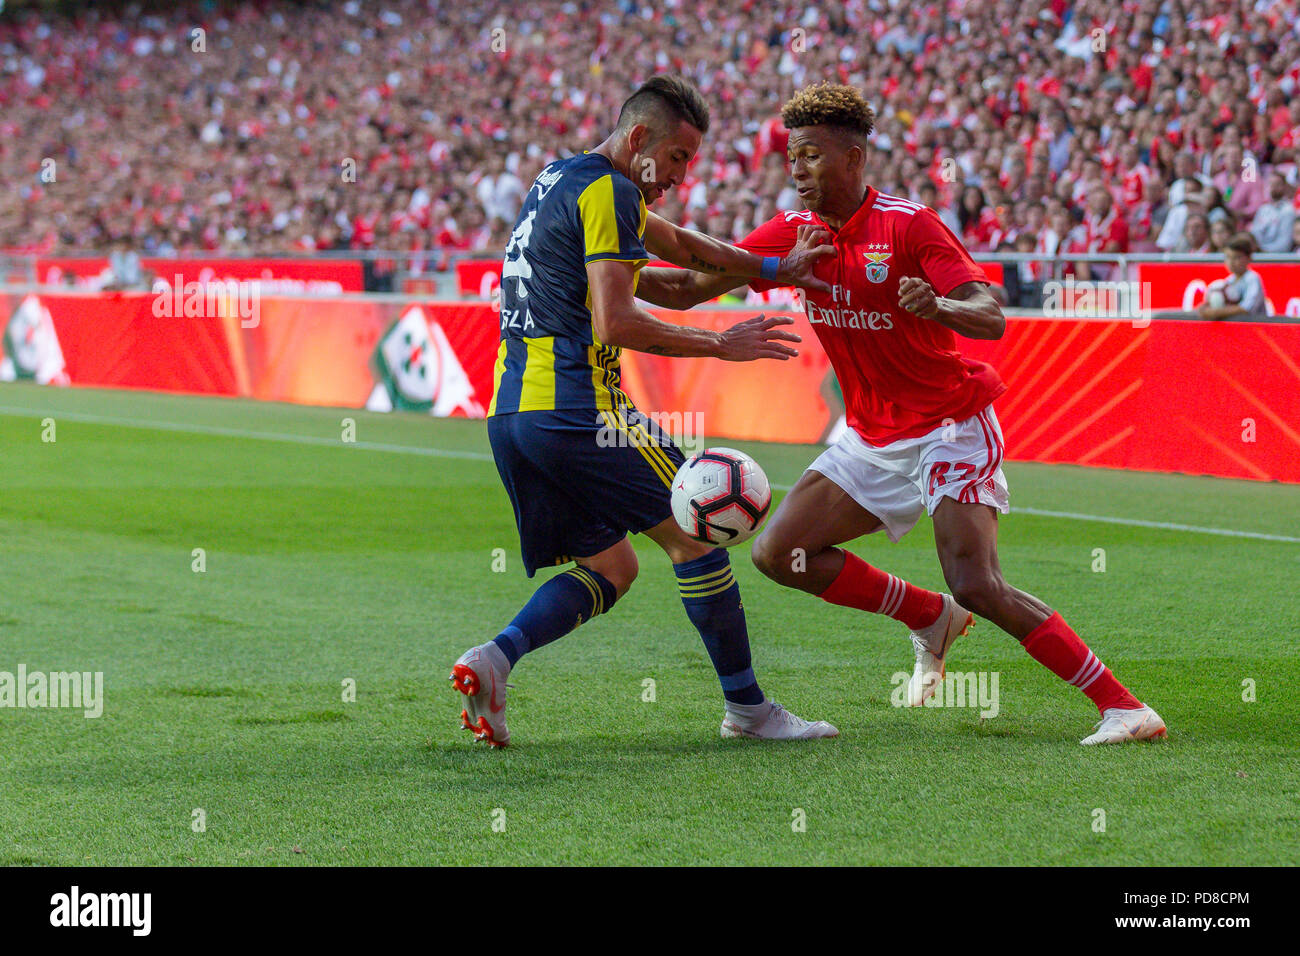 Lisbon, Portugal. August 07, 2018. Lisbon, Portugal. Benfica's midfielder from Portugal Gedson Fernandes (83) and Fenerbahce's defender from Chile Mauricio Isla (4) during the game of the 1st leg of the Third Qualifying Round of the UEFA Champions League, SL Benfica vs Fenerbahce SK © Alexandre de Sousa/Alamy Live News Stock Photo